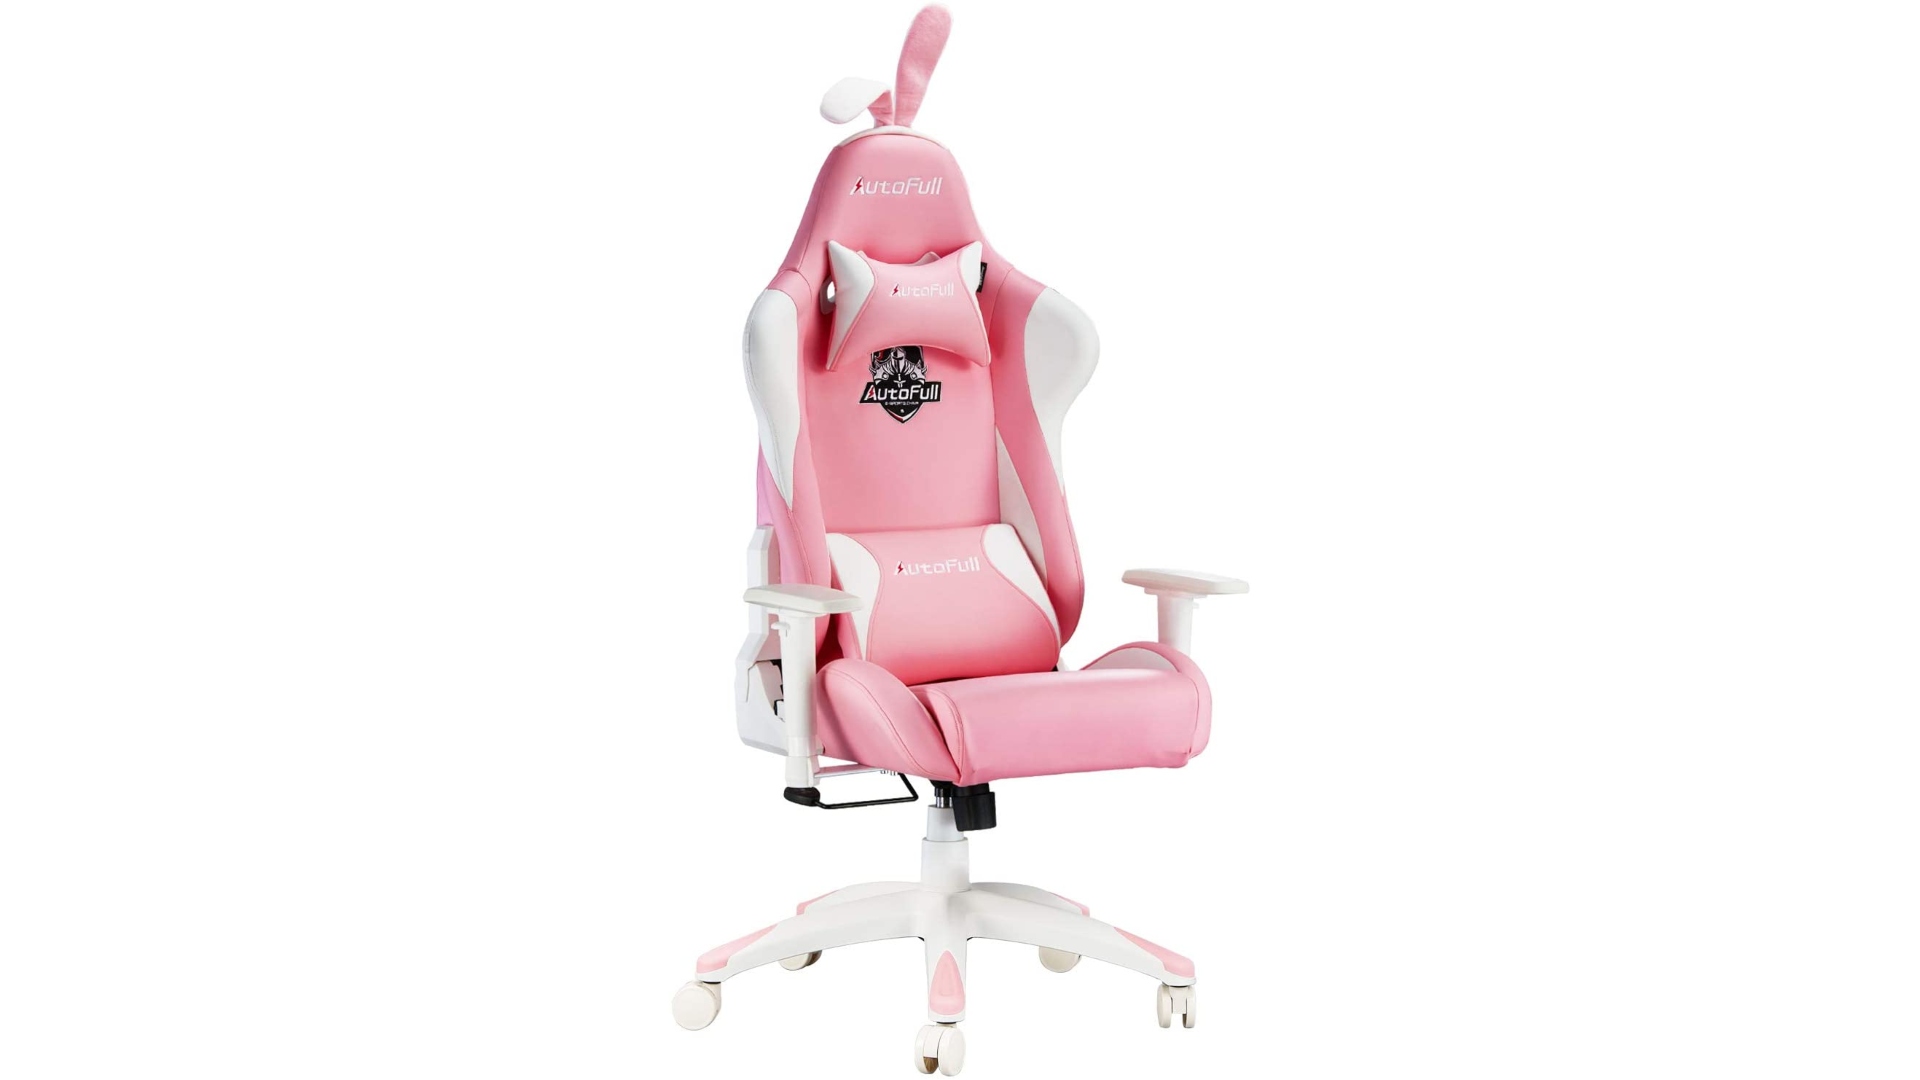 Fly YUTING Gaming Chair, Ergonomic Computer Cockpit Chair with Led Lights,  Comfortable Racing Simulator Cockpit Game Chair with Hanging 3  Screens,Purple